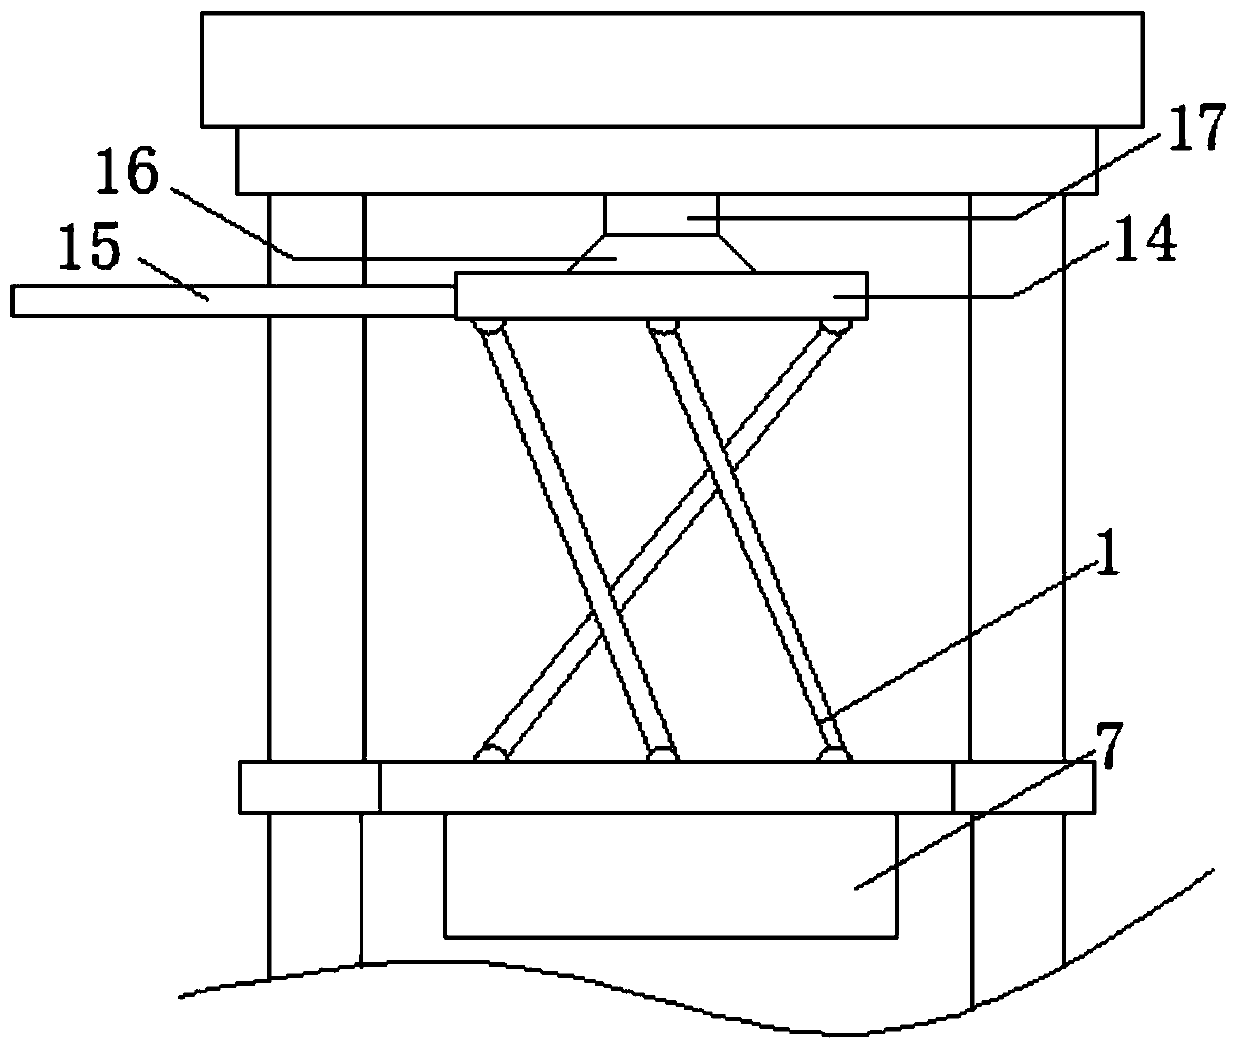 Crude oil residue extruding and filtering device